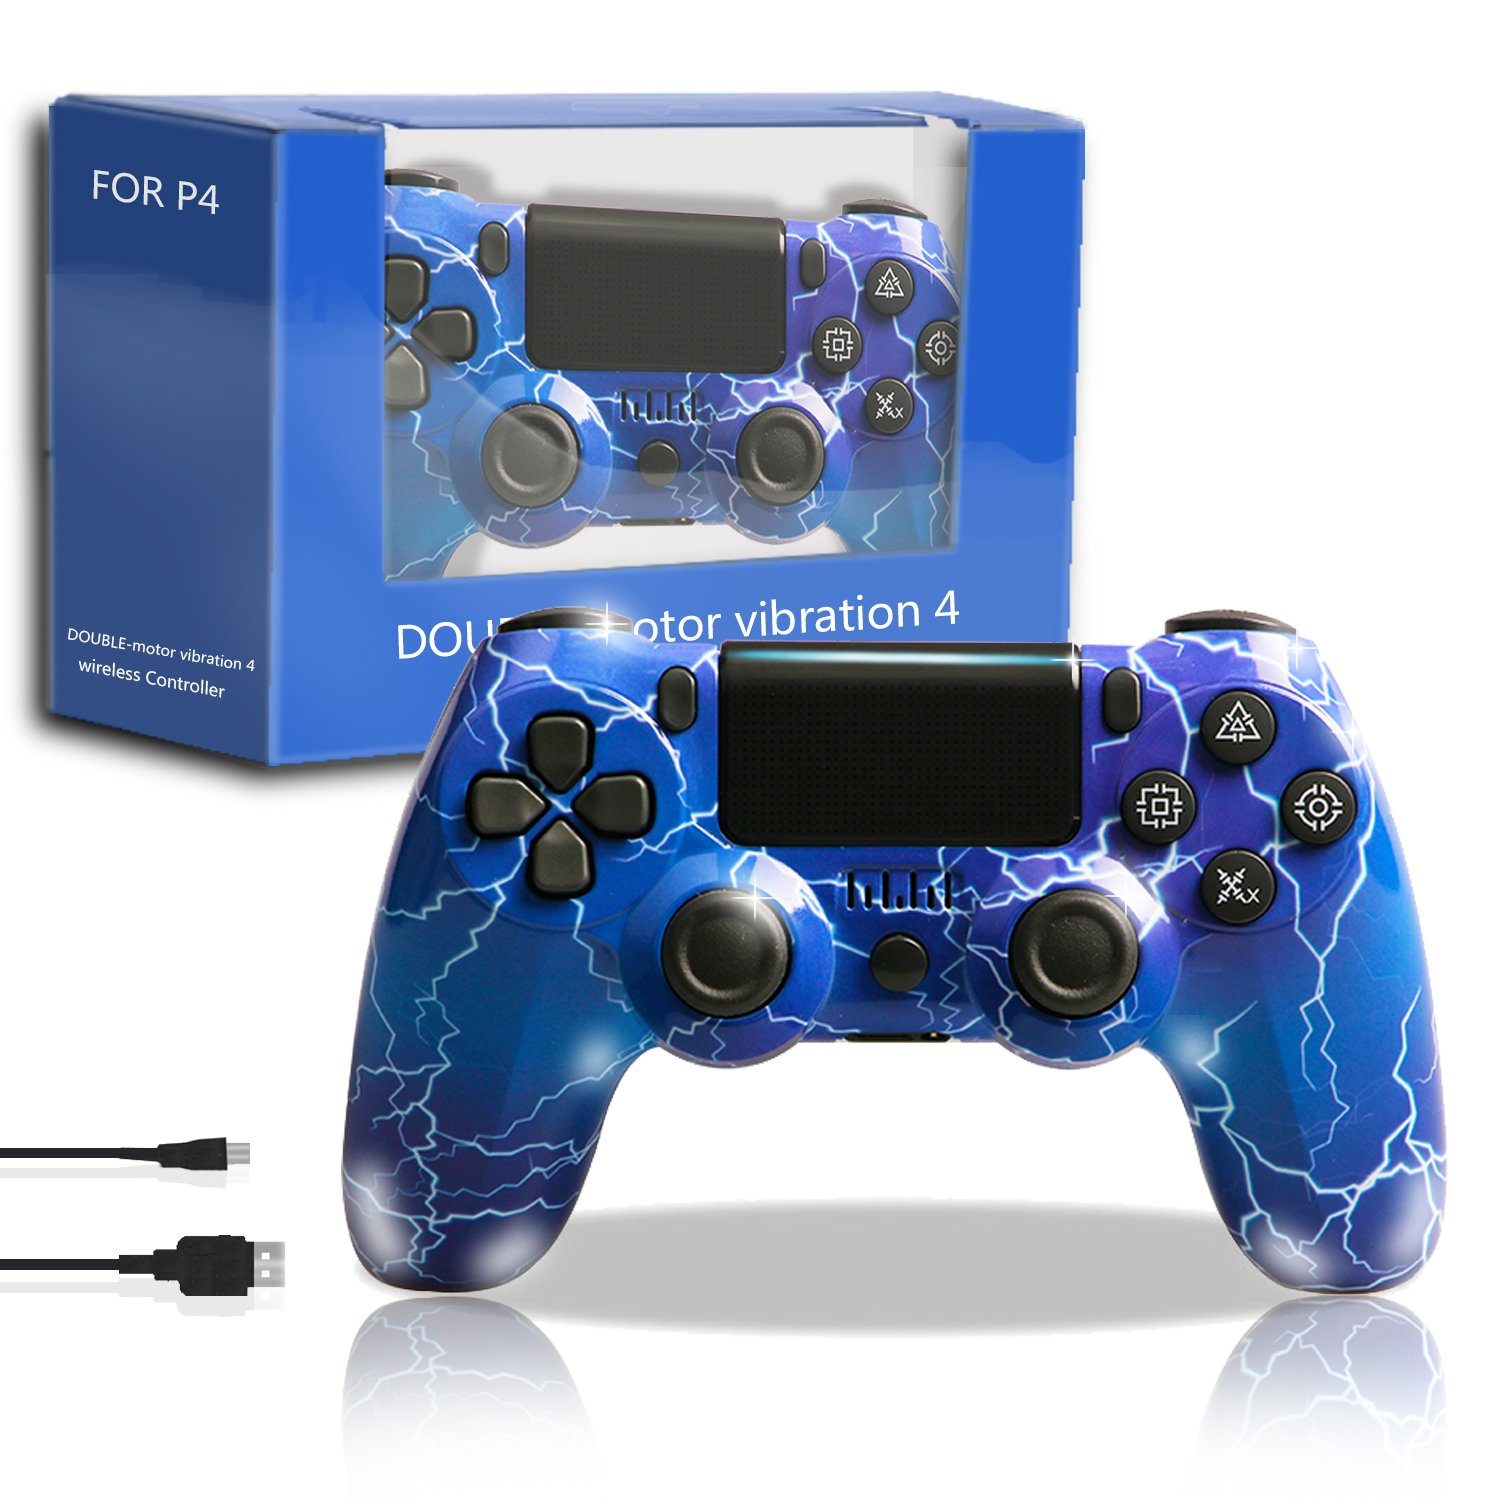 Gamepad,Game mit Controller, 4-Controller, Wireless Kompatibel PC/PS2/PS3/PS4 für PS4,600mAh PlayStation Tadow Controller